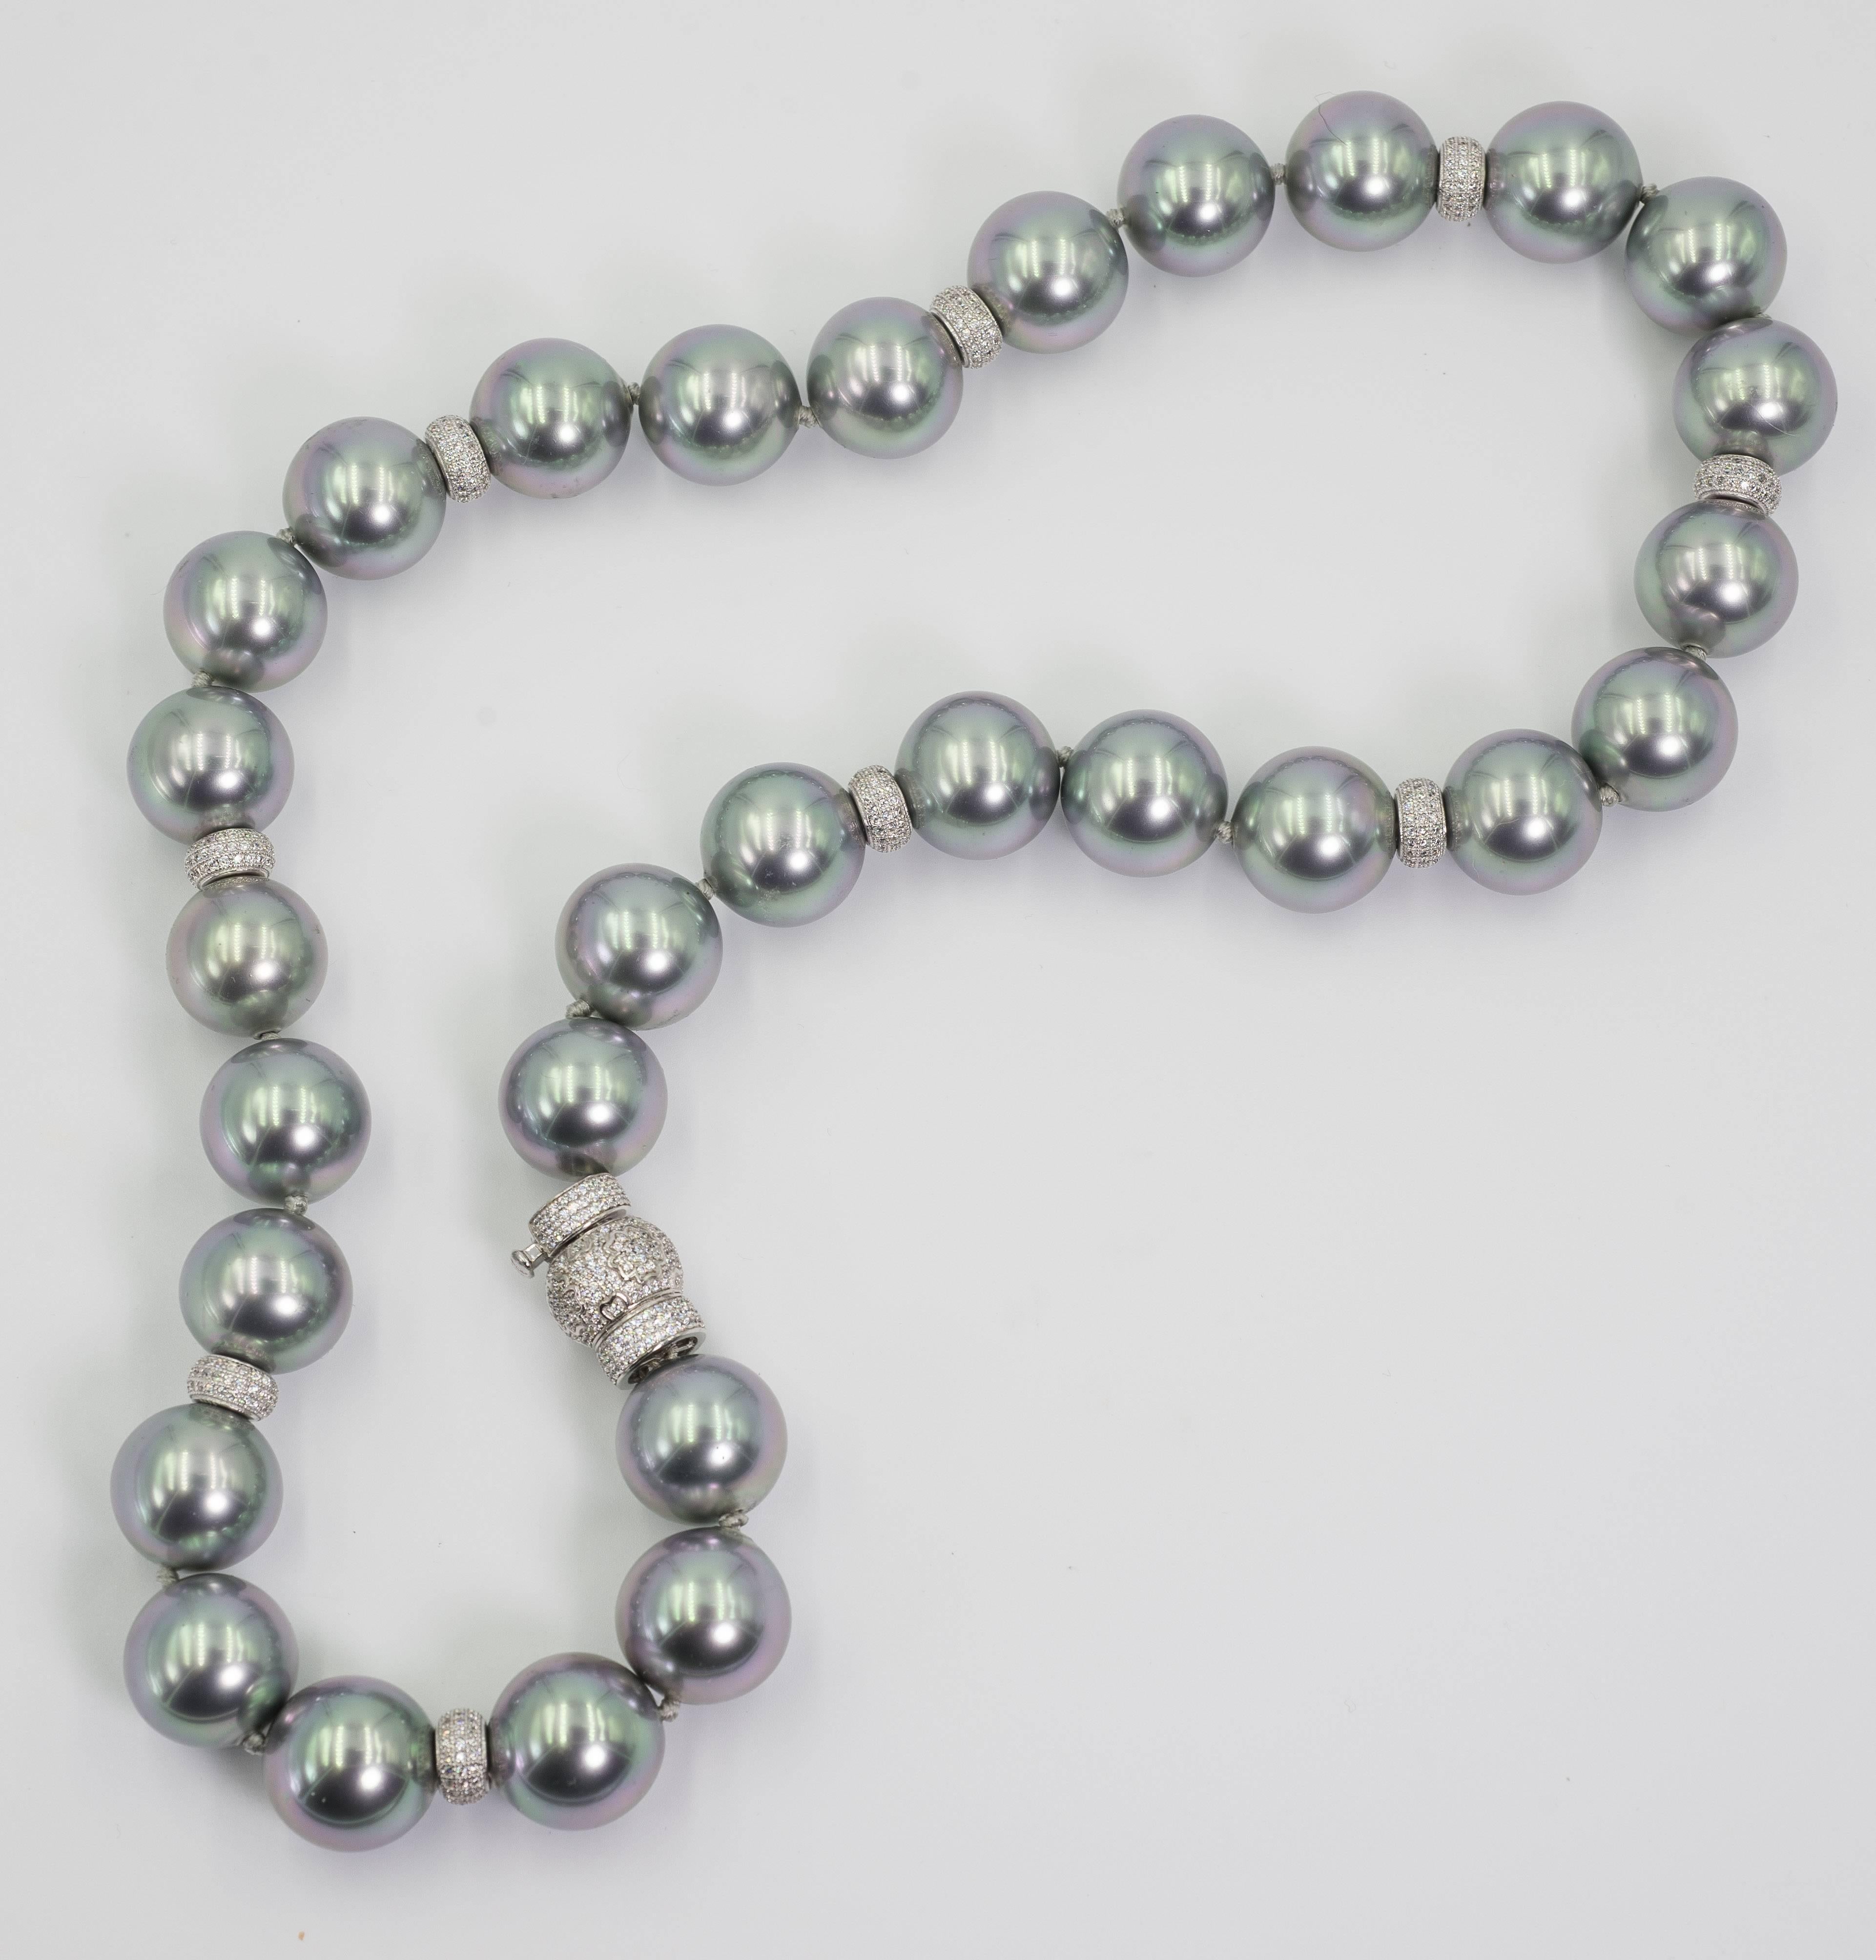 24 inch faux 18mm French Gris Argent handmade pearls by France's oldest faux pearl makers dating back to Napoleon lll.  The unique color 18mm pearls were made exclusively for Bergdorf Goodman over 20 years ago. The pearls are interspaced with pave